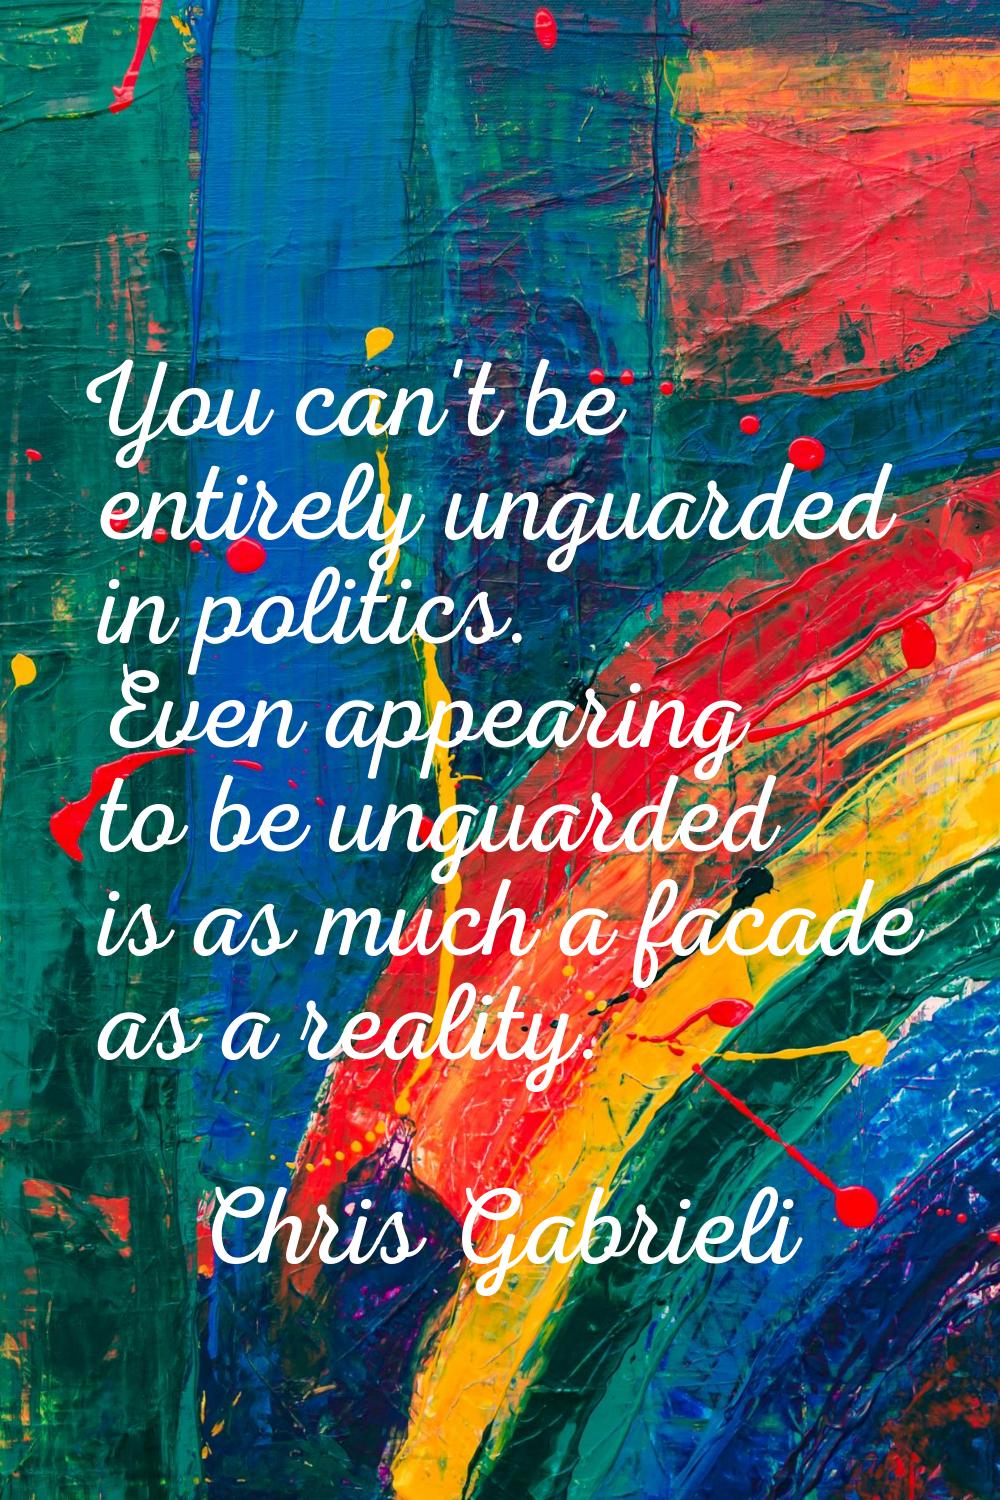 You can't be entirely unguarded in politics. Even appearing to be unguarded is as much a facade as 